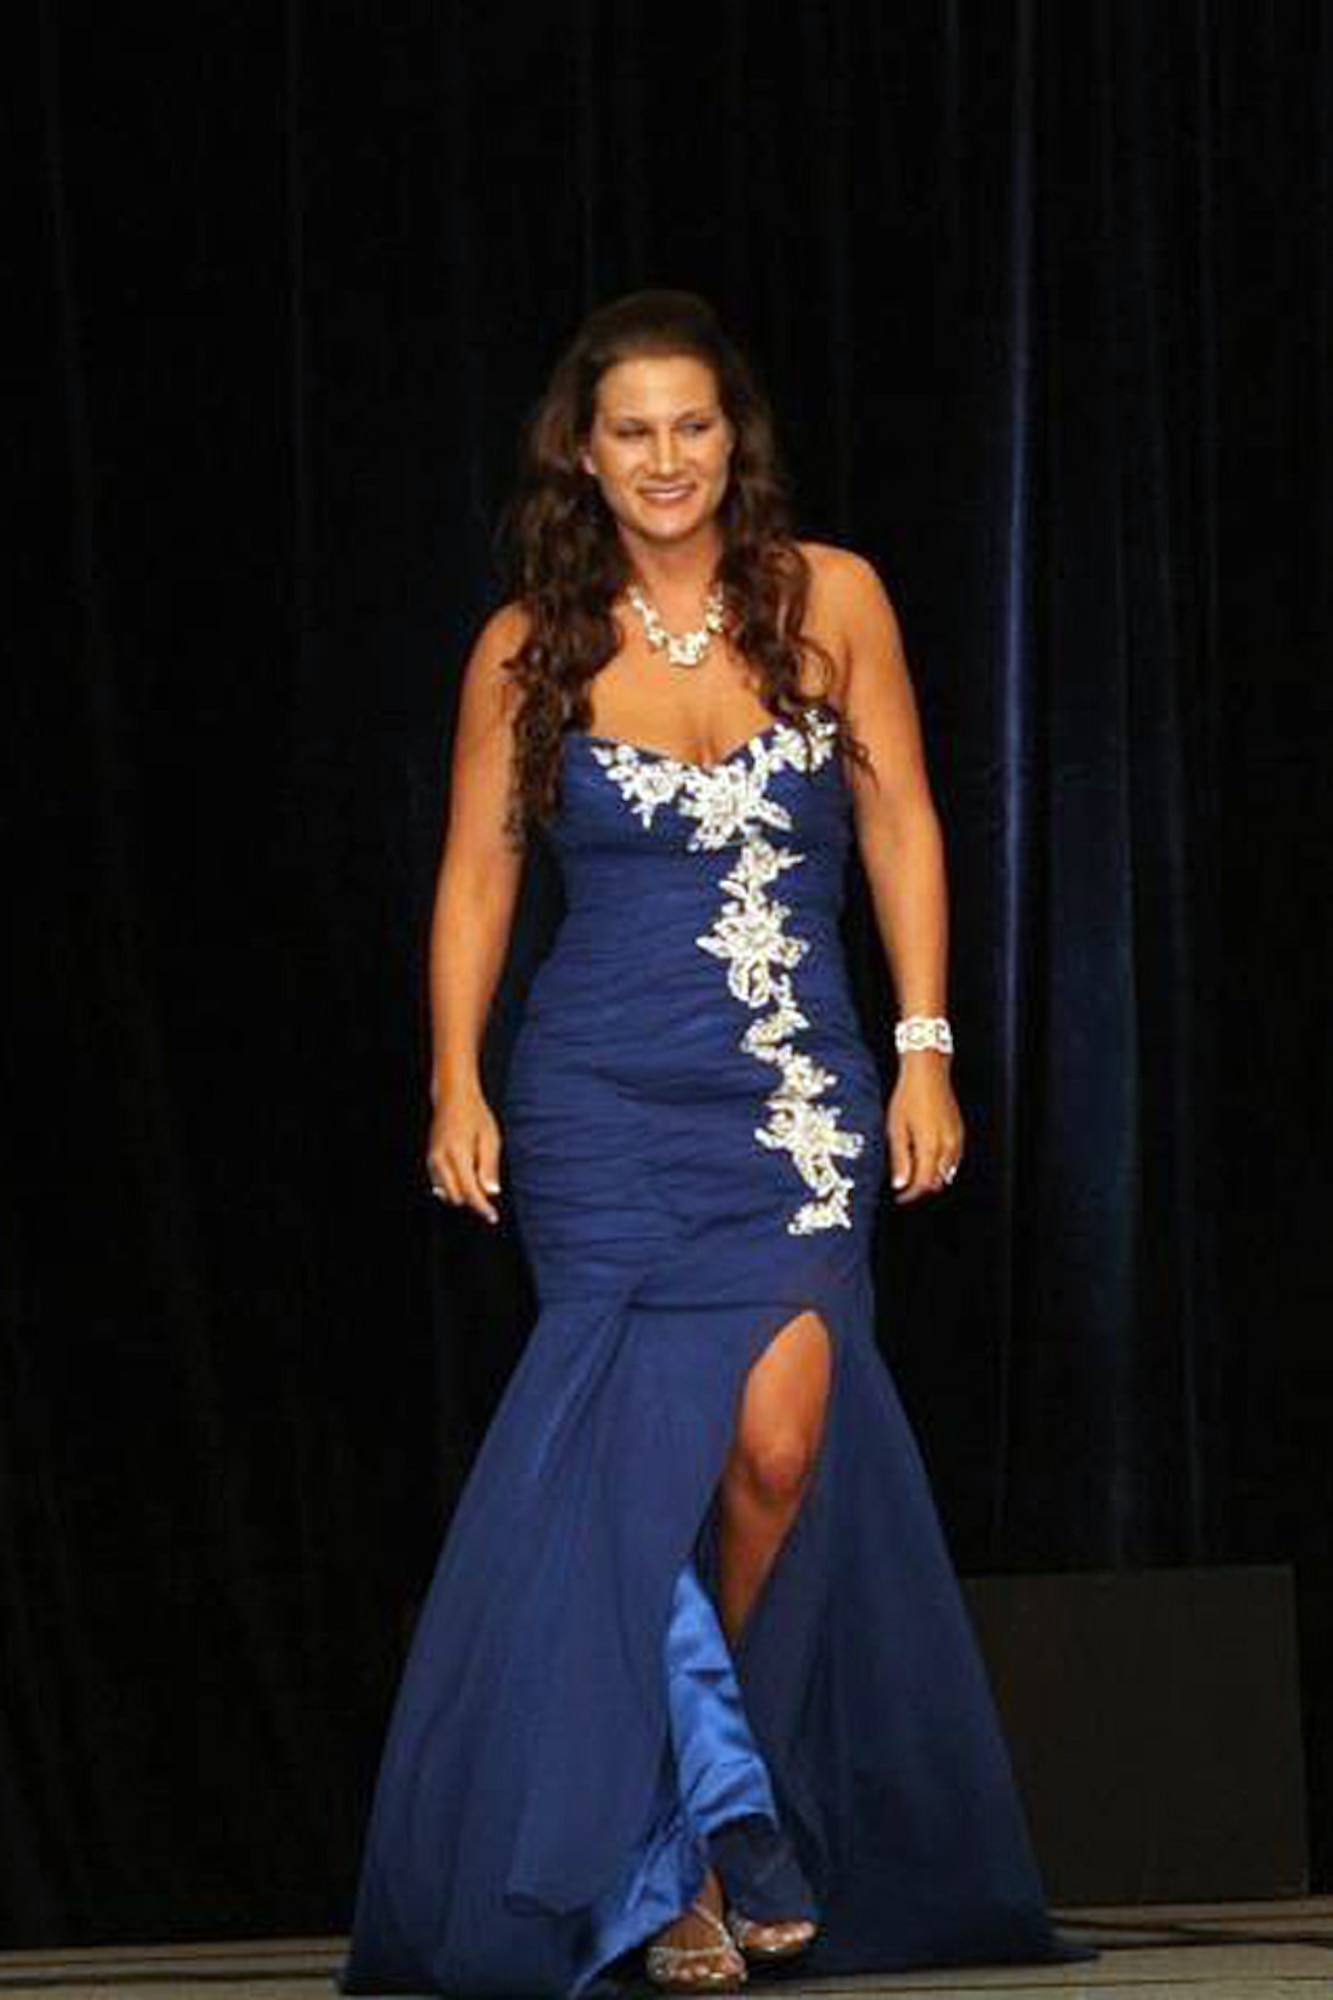 Staff Sgt. Kimberly Miller walks onto the stage at the Ms. Veteran America competition in Arlington, Va., Oct. 7, 2012. Miller is a military training instructor at Joint Base San Antonio-Lackland, Texas, and competed in the first pageant for women in uniform. (Courtesy photo)